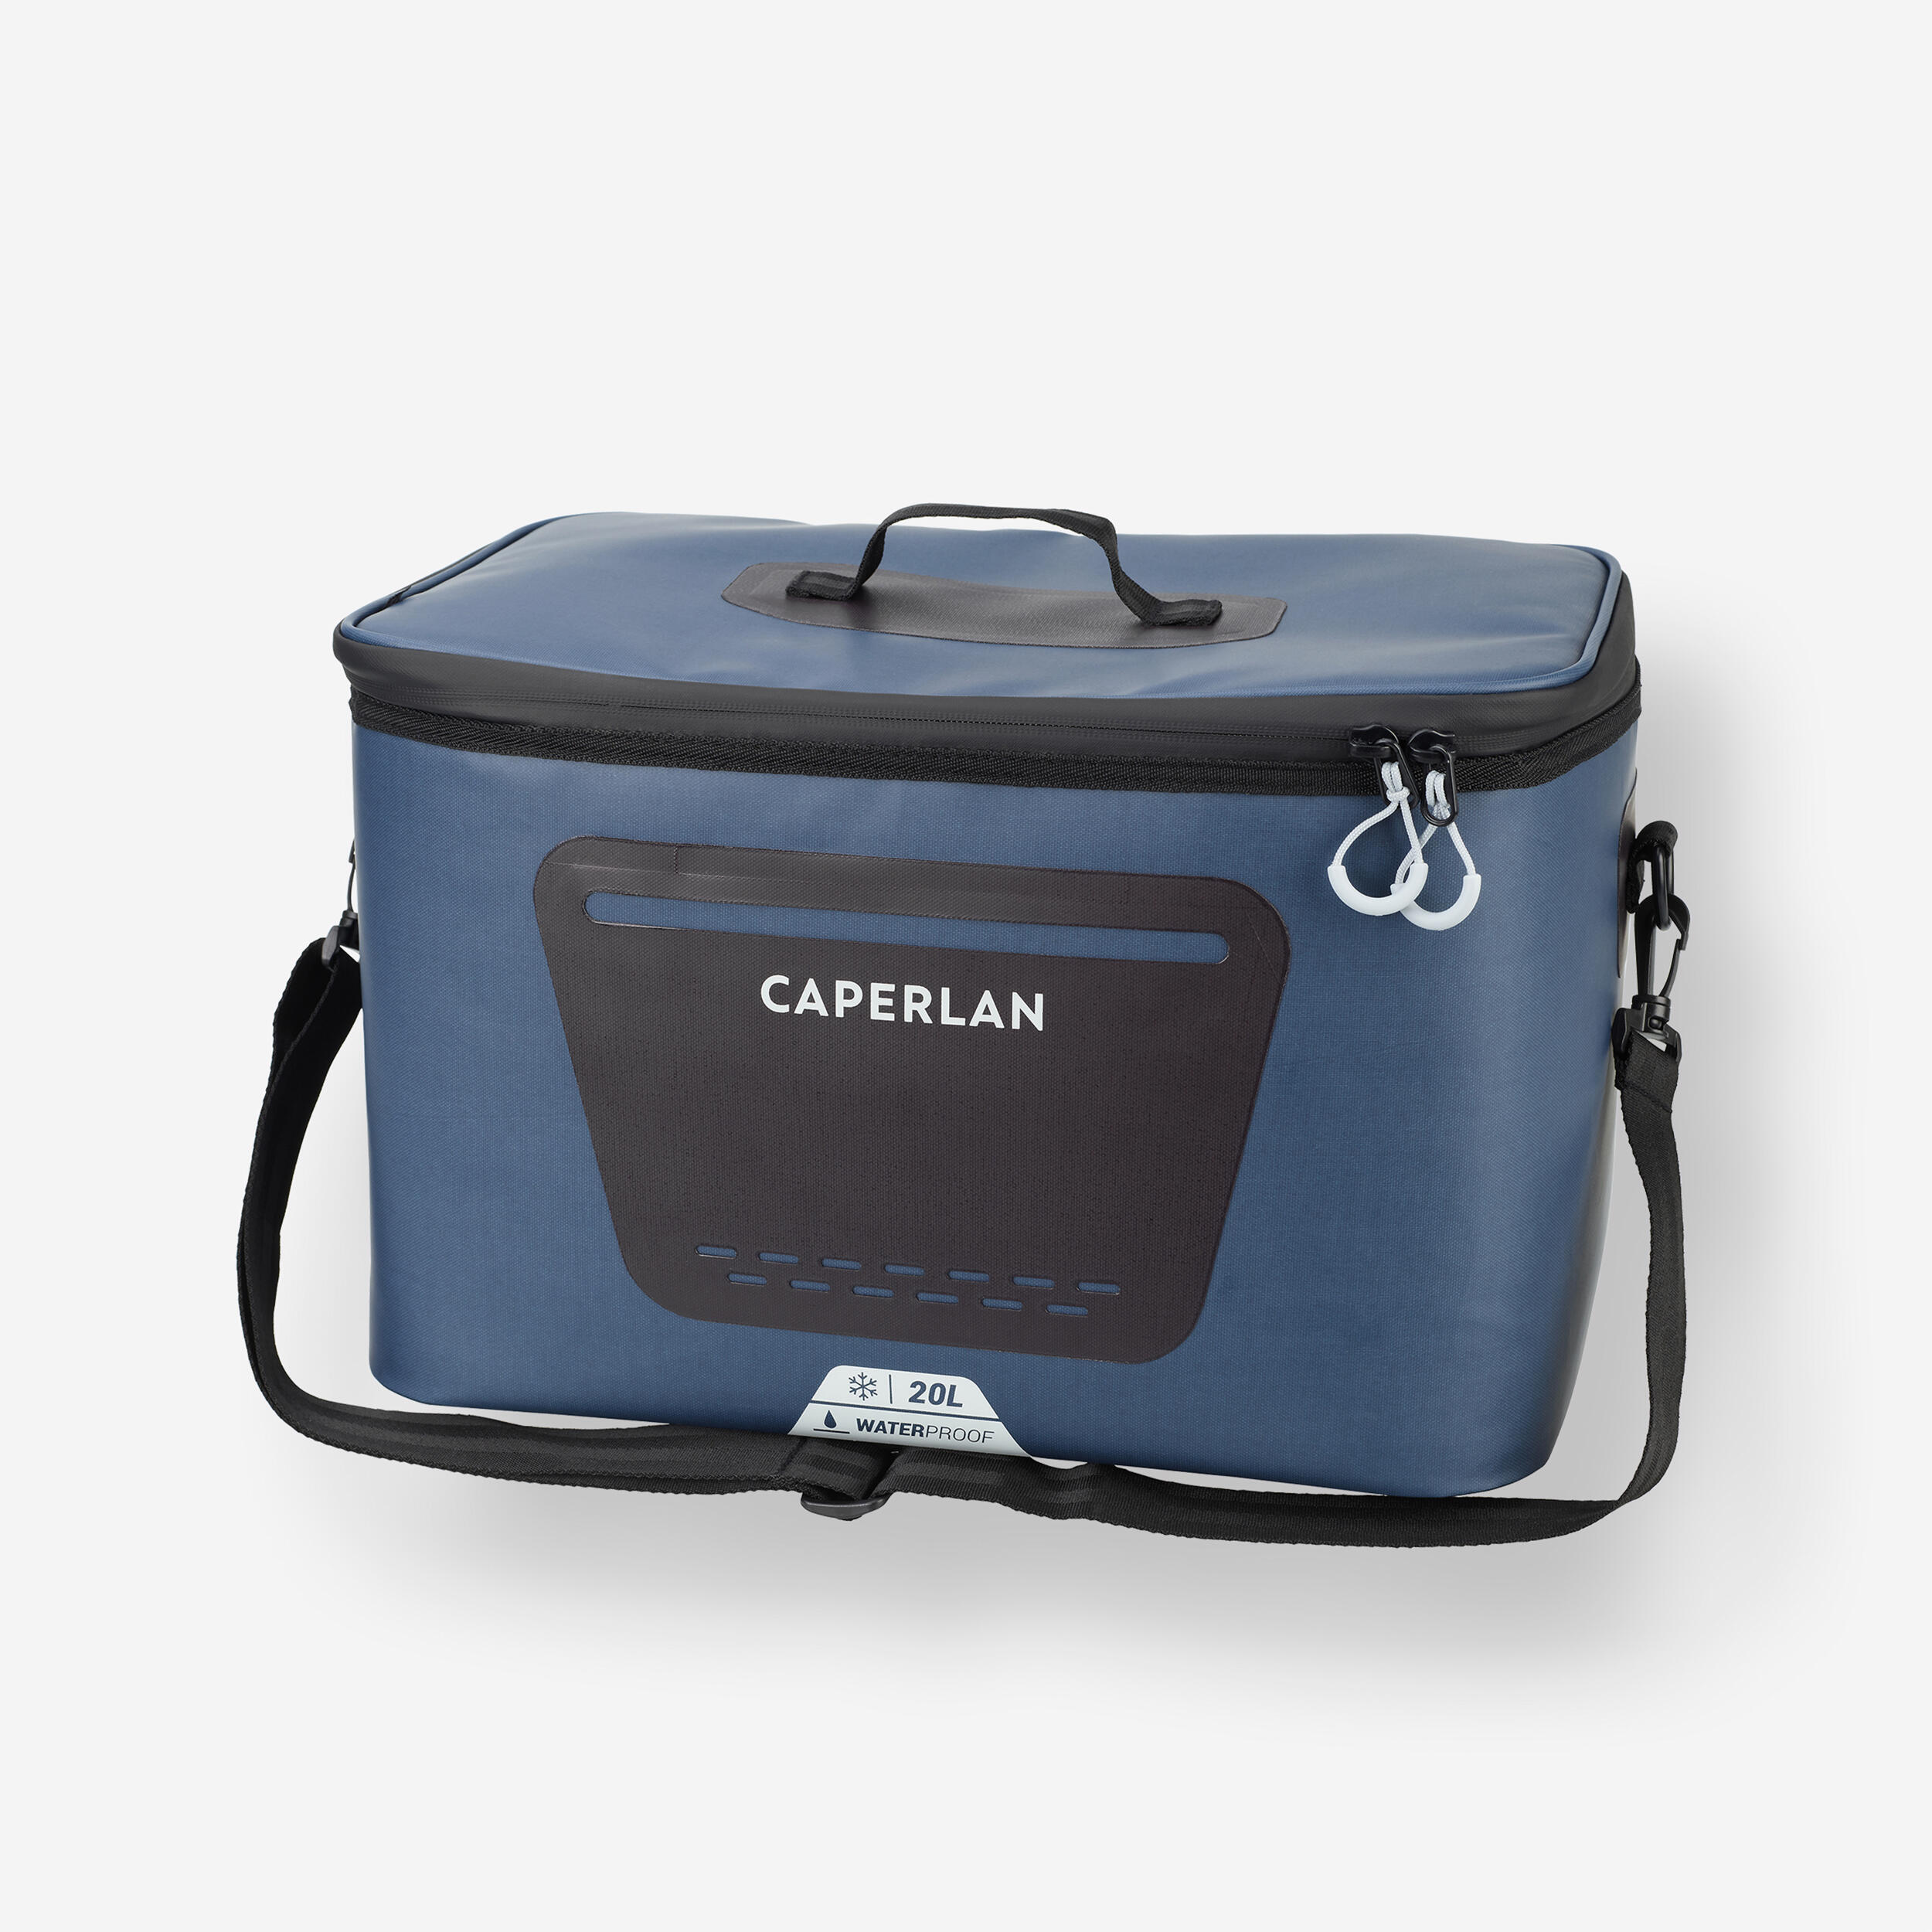 CAPERLAN XL 20 L fishing cool bag - Keeps cool for 8 hours 30 minutes - 20L